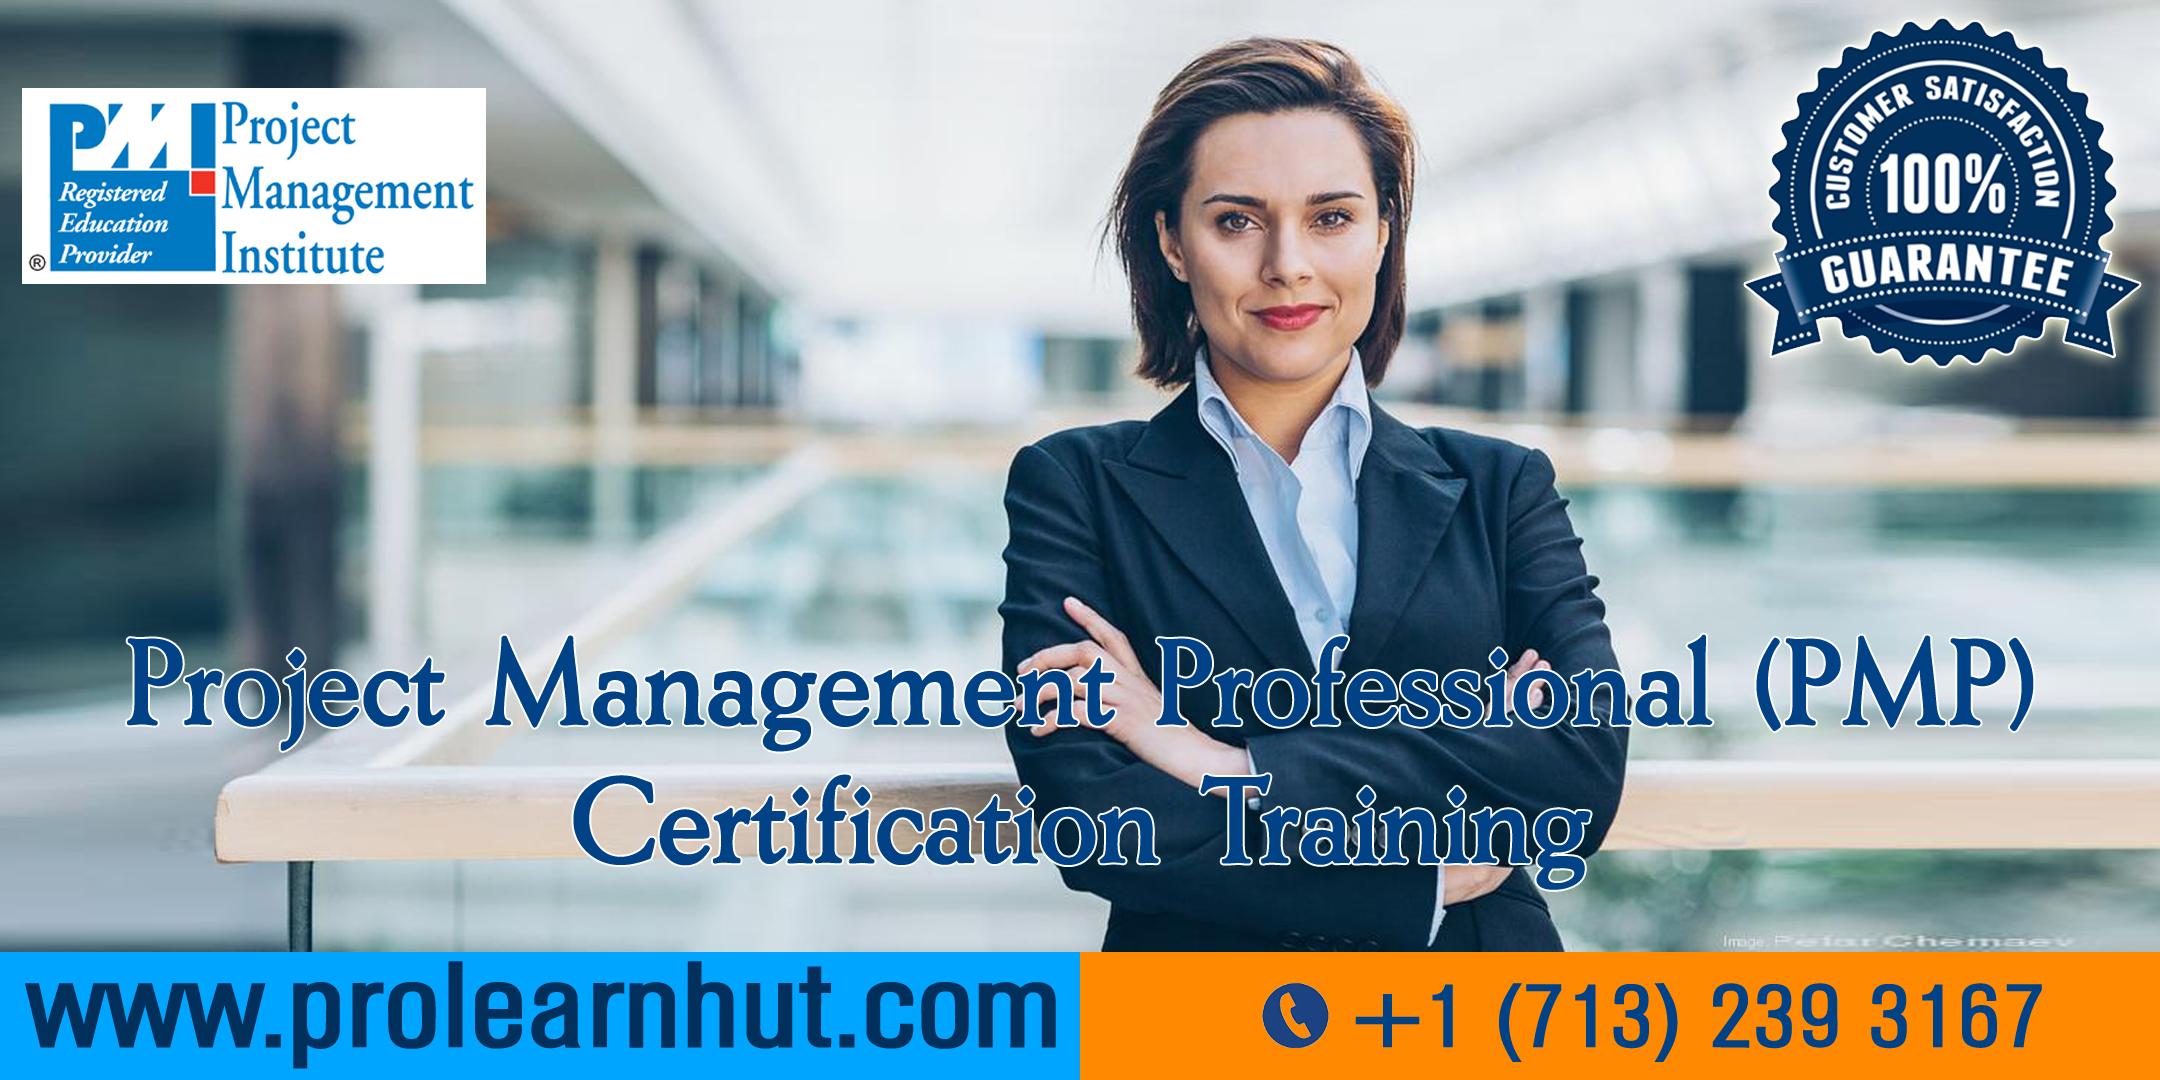 PMP Certification | Project Management Certification| PMP Training in Lakewood, NJ | ProLearnHut